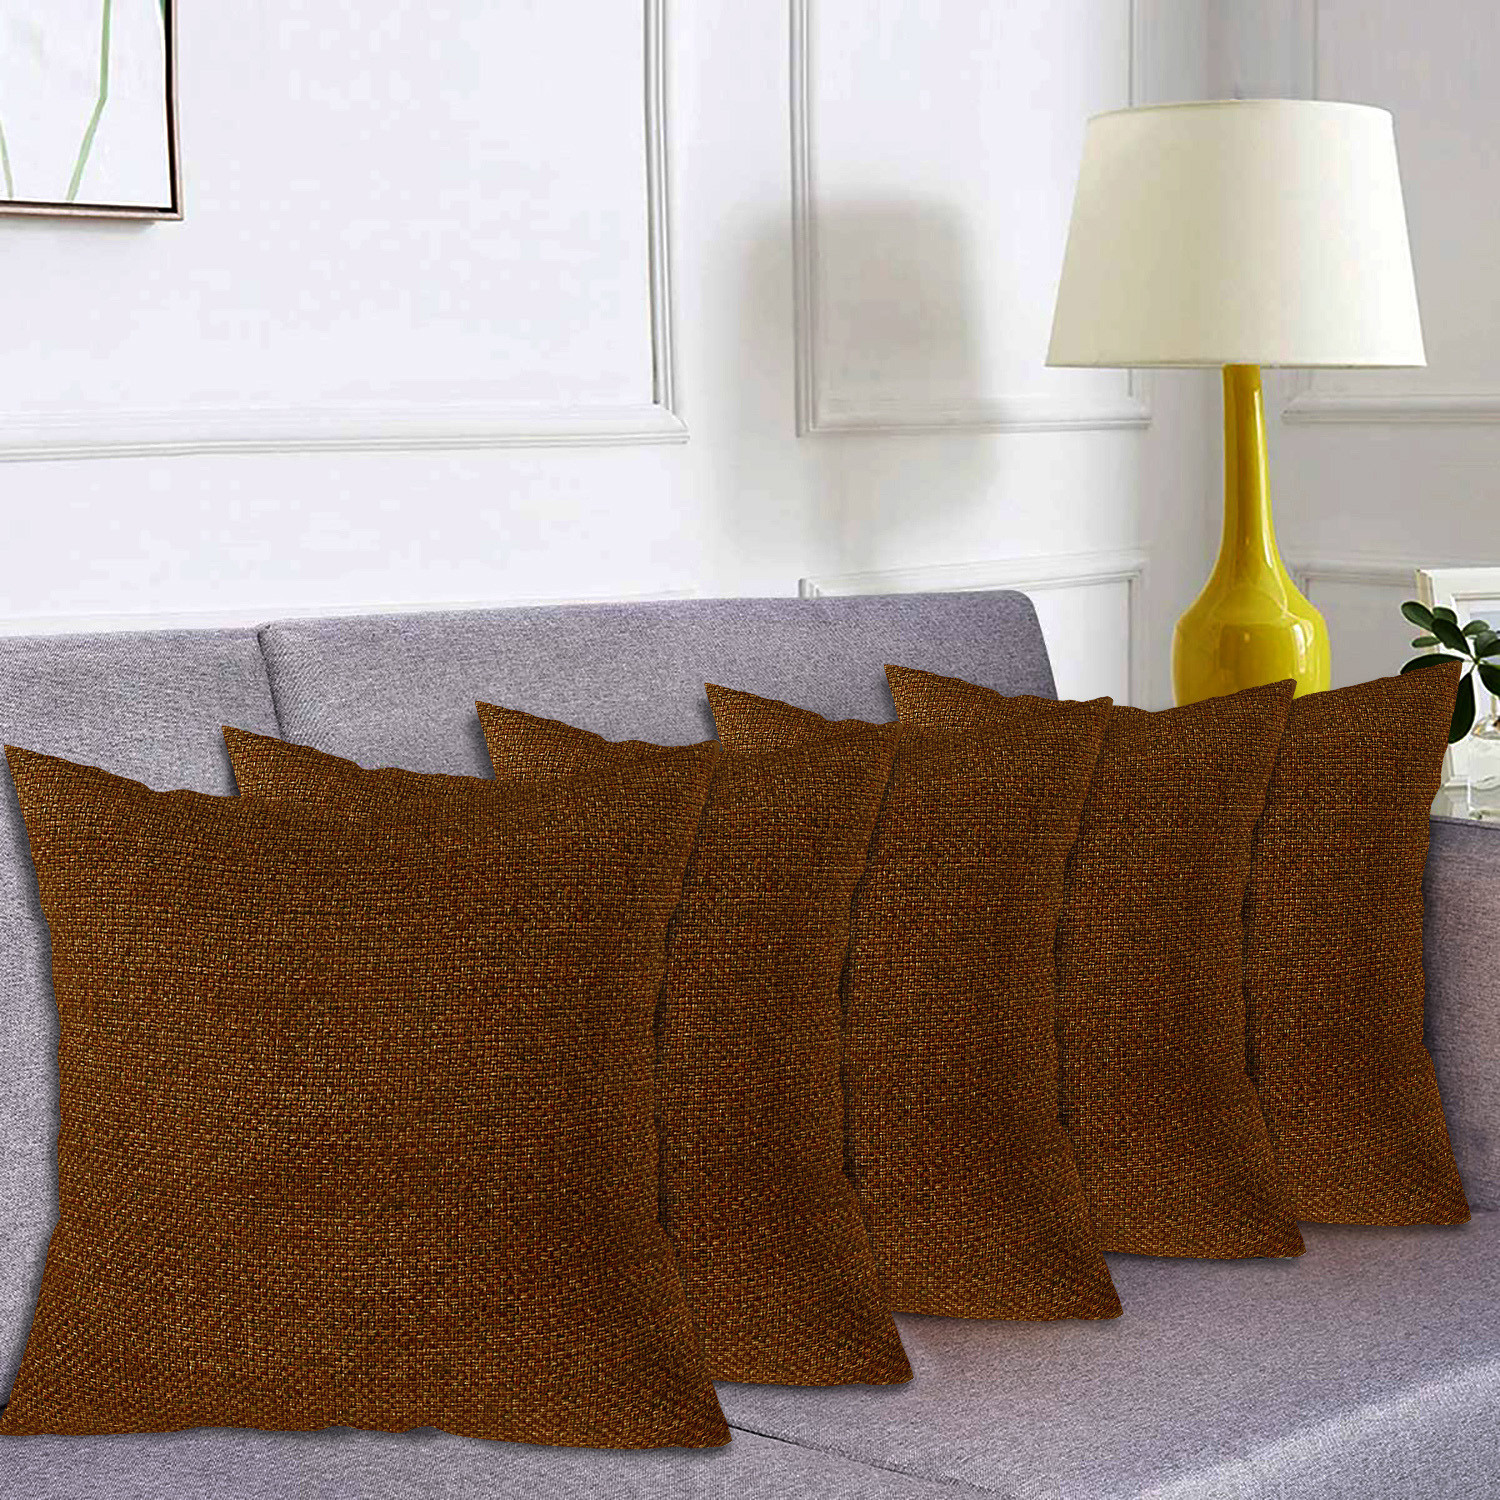 Kuber Industries Jute Cotton Decorative Square Cushion Cover, Cushion Case For Sofa Couch Bed 16x16 Inch-(Brown)